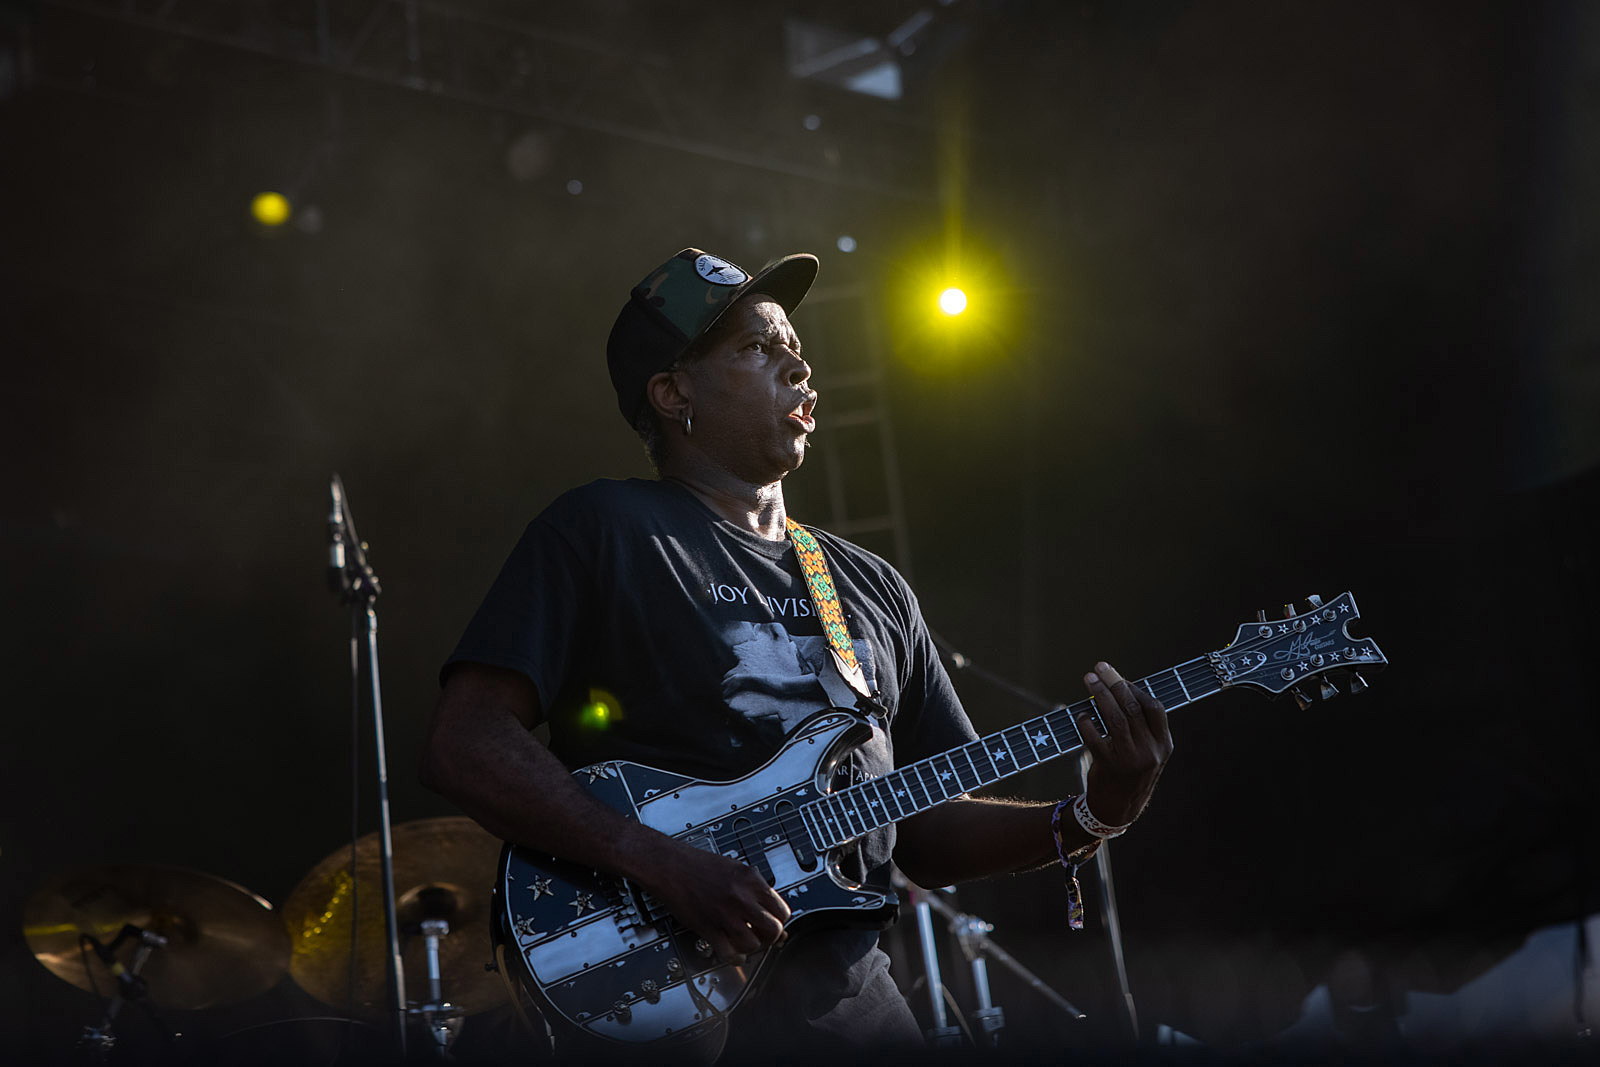 Living Colour at Riot Fest 2021: Friday